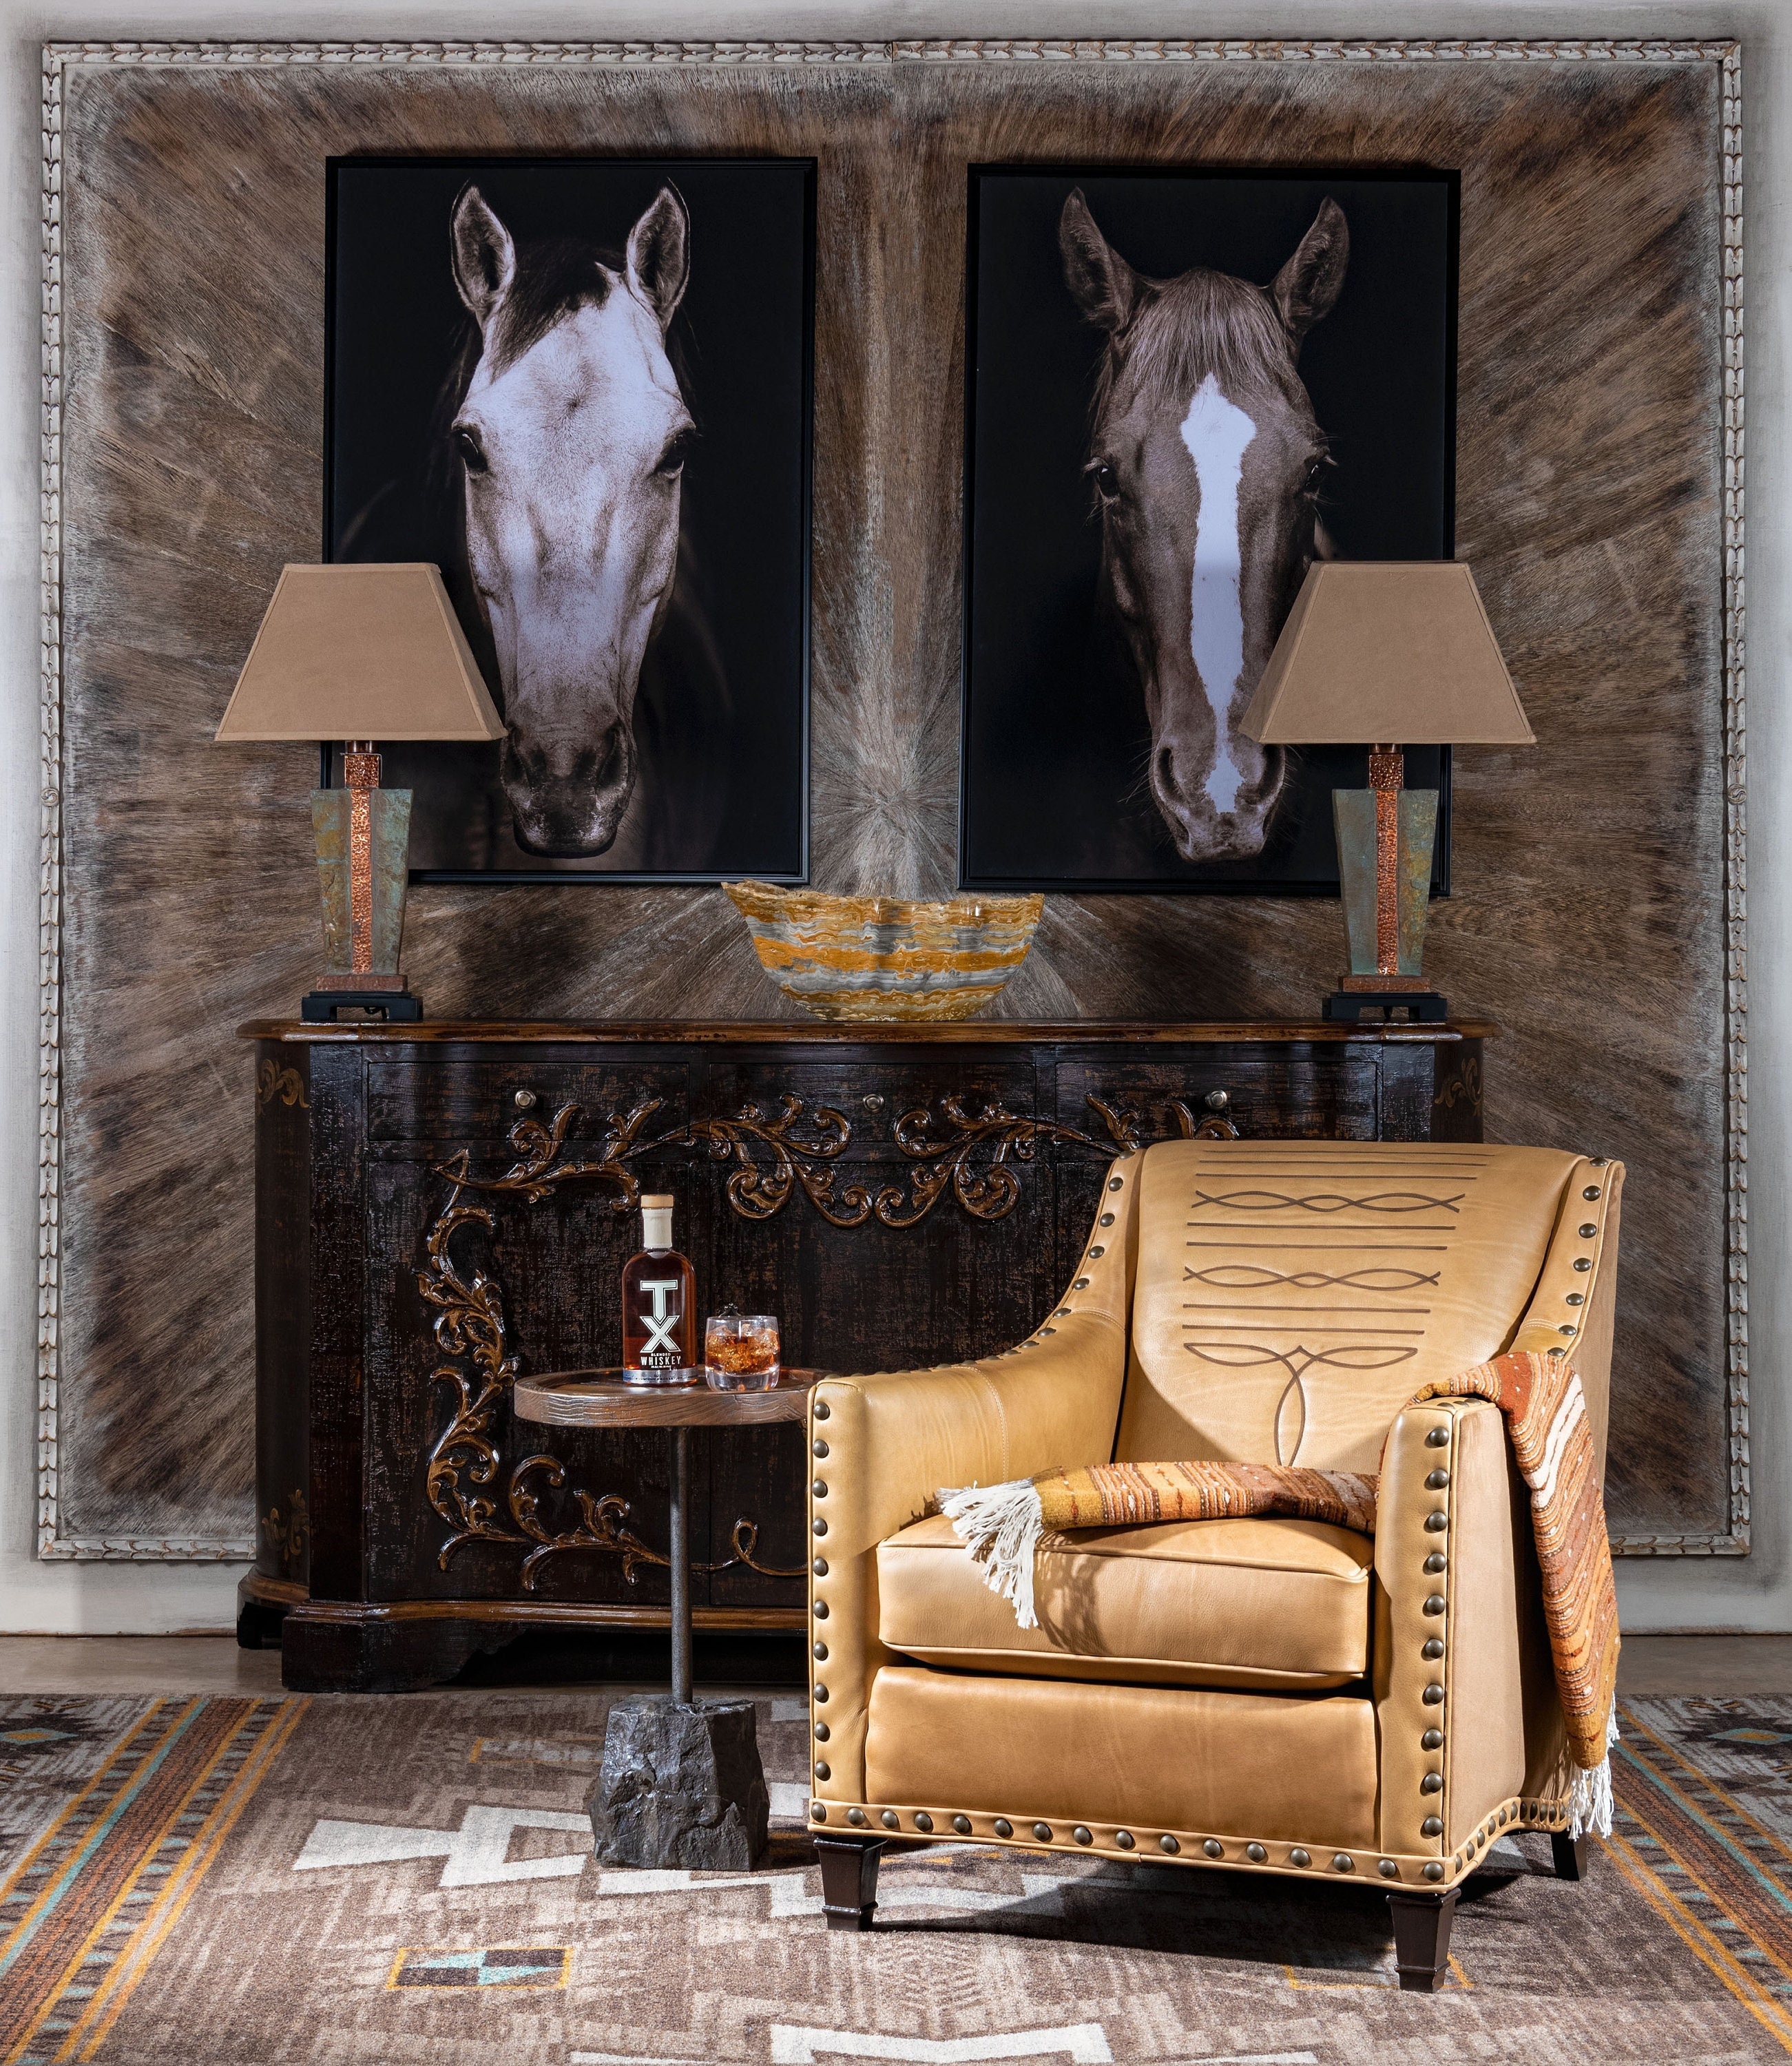 Classic Boot Stitch Accent Chair  Your Westenr Decor – Your Western Decor